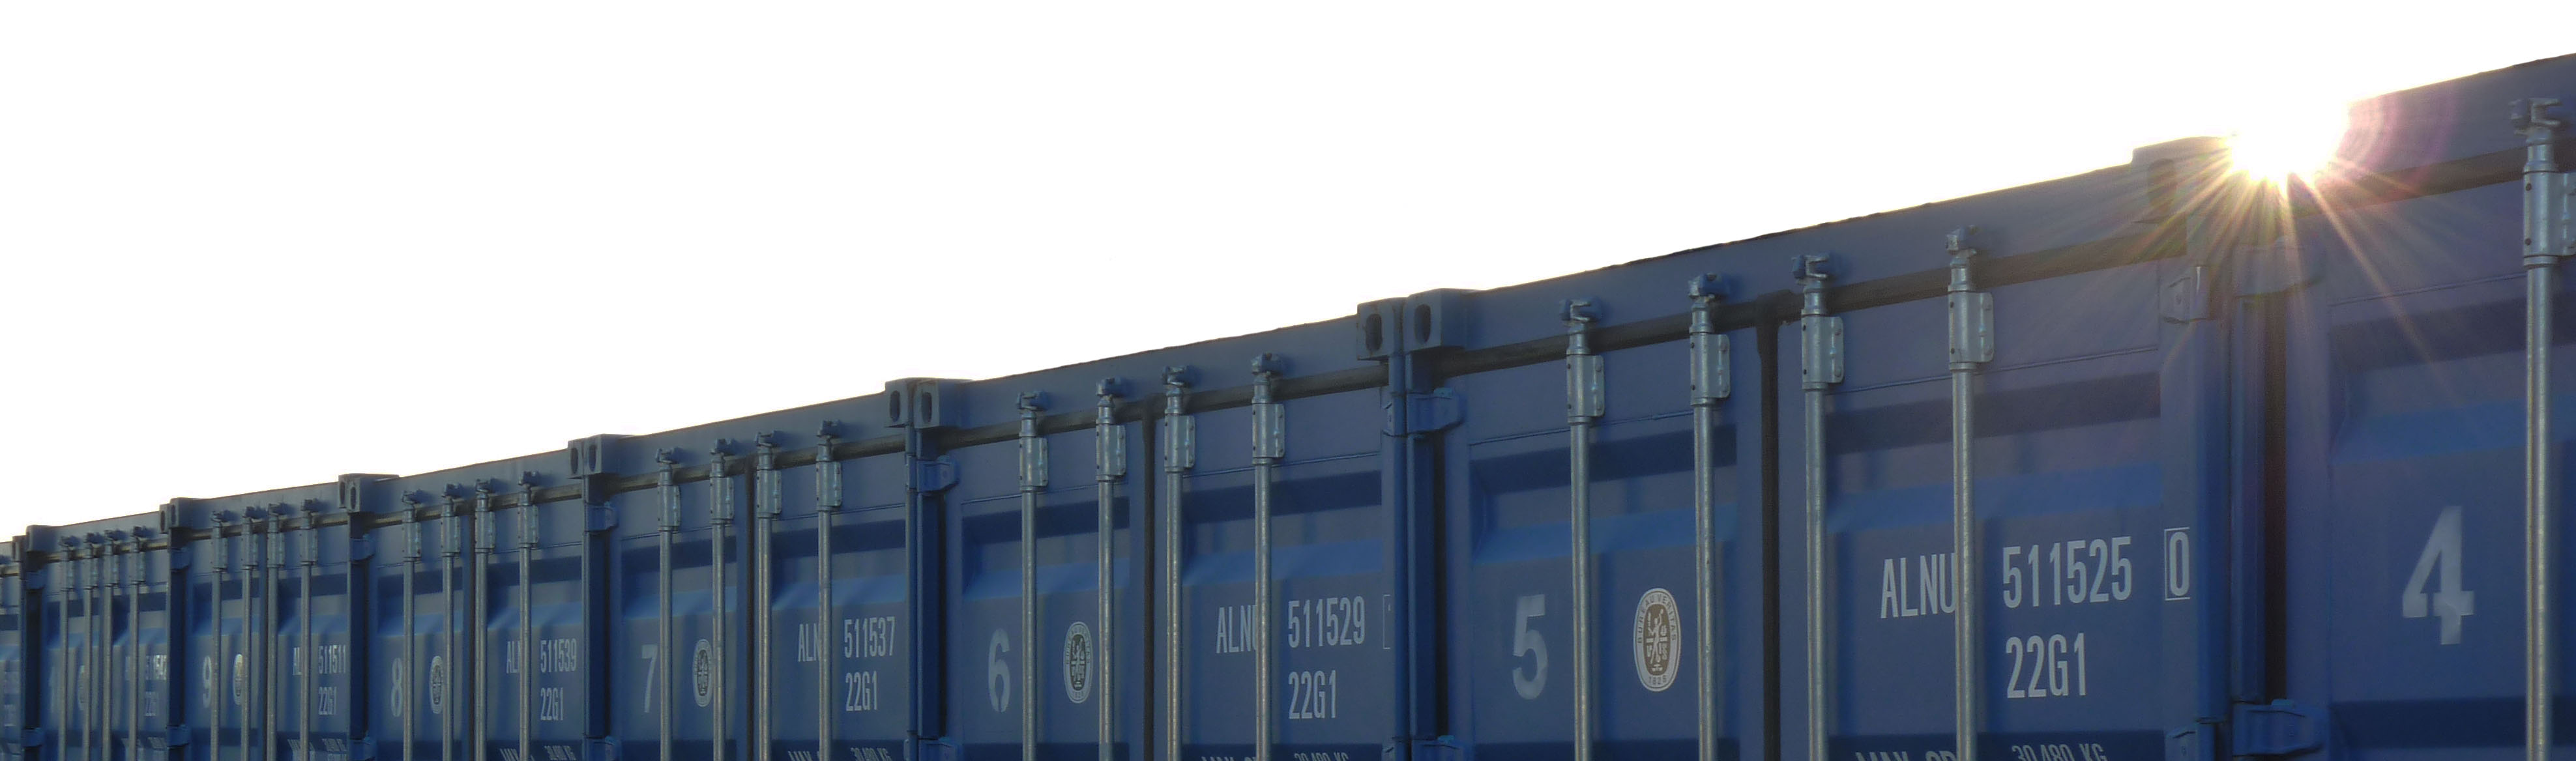 Containers_with_sun_edited.png